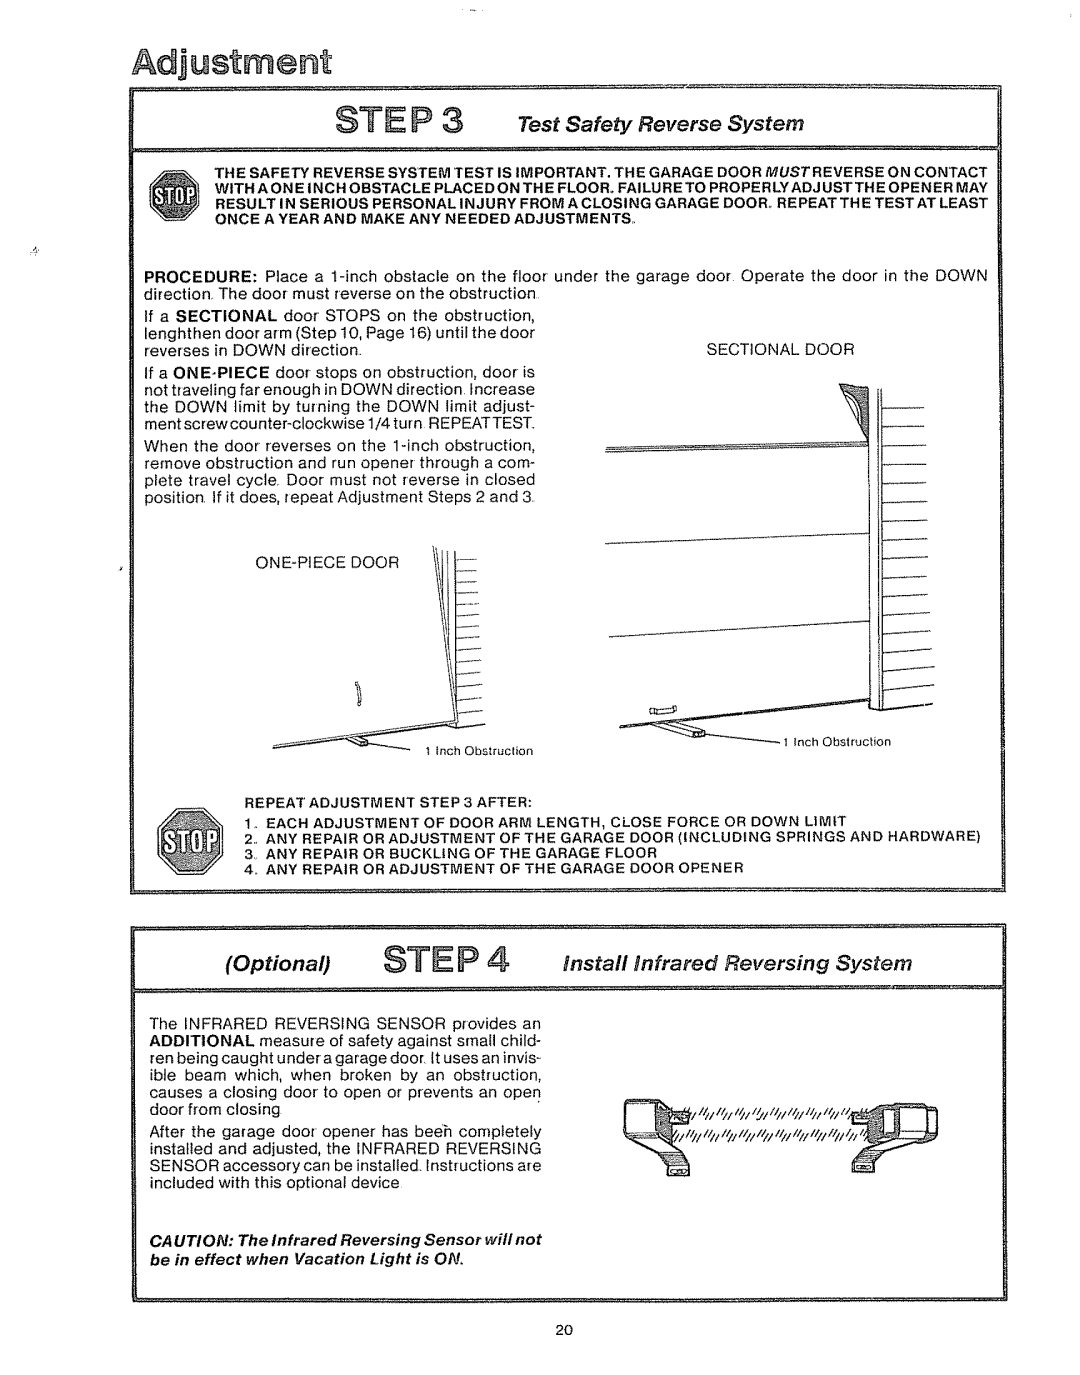 Craftsman 39535006 specifications Optional, install tnfrared, Reversing, System, if a SECTIONAL door STOPS, limit, Step 